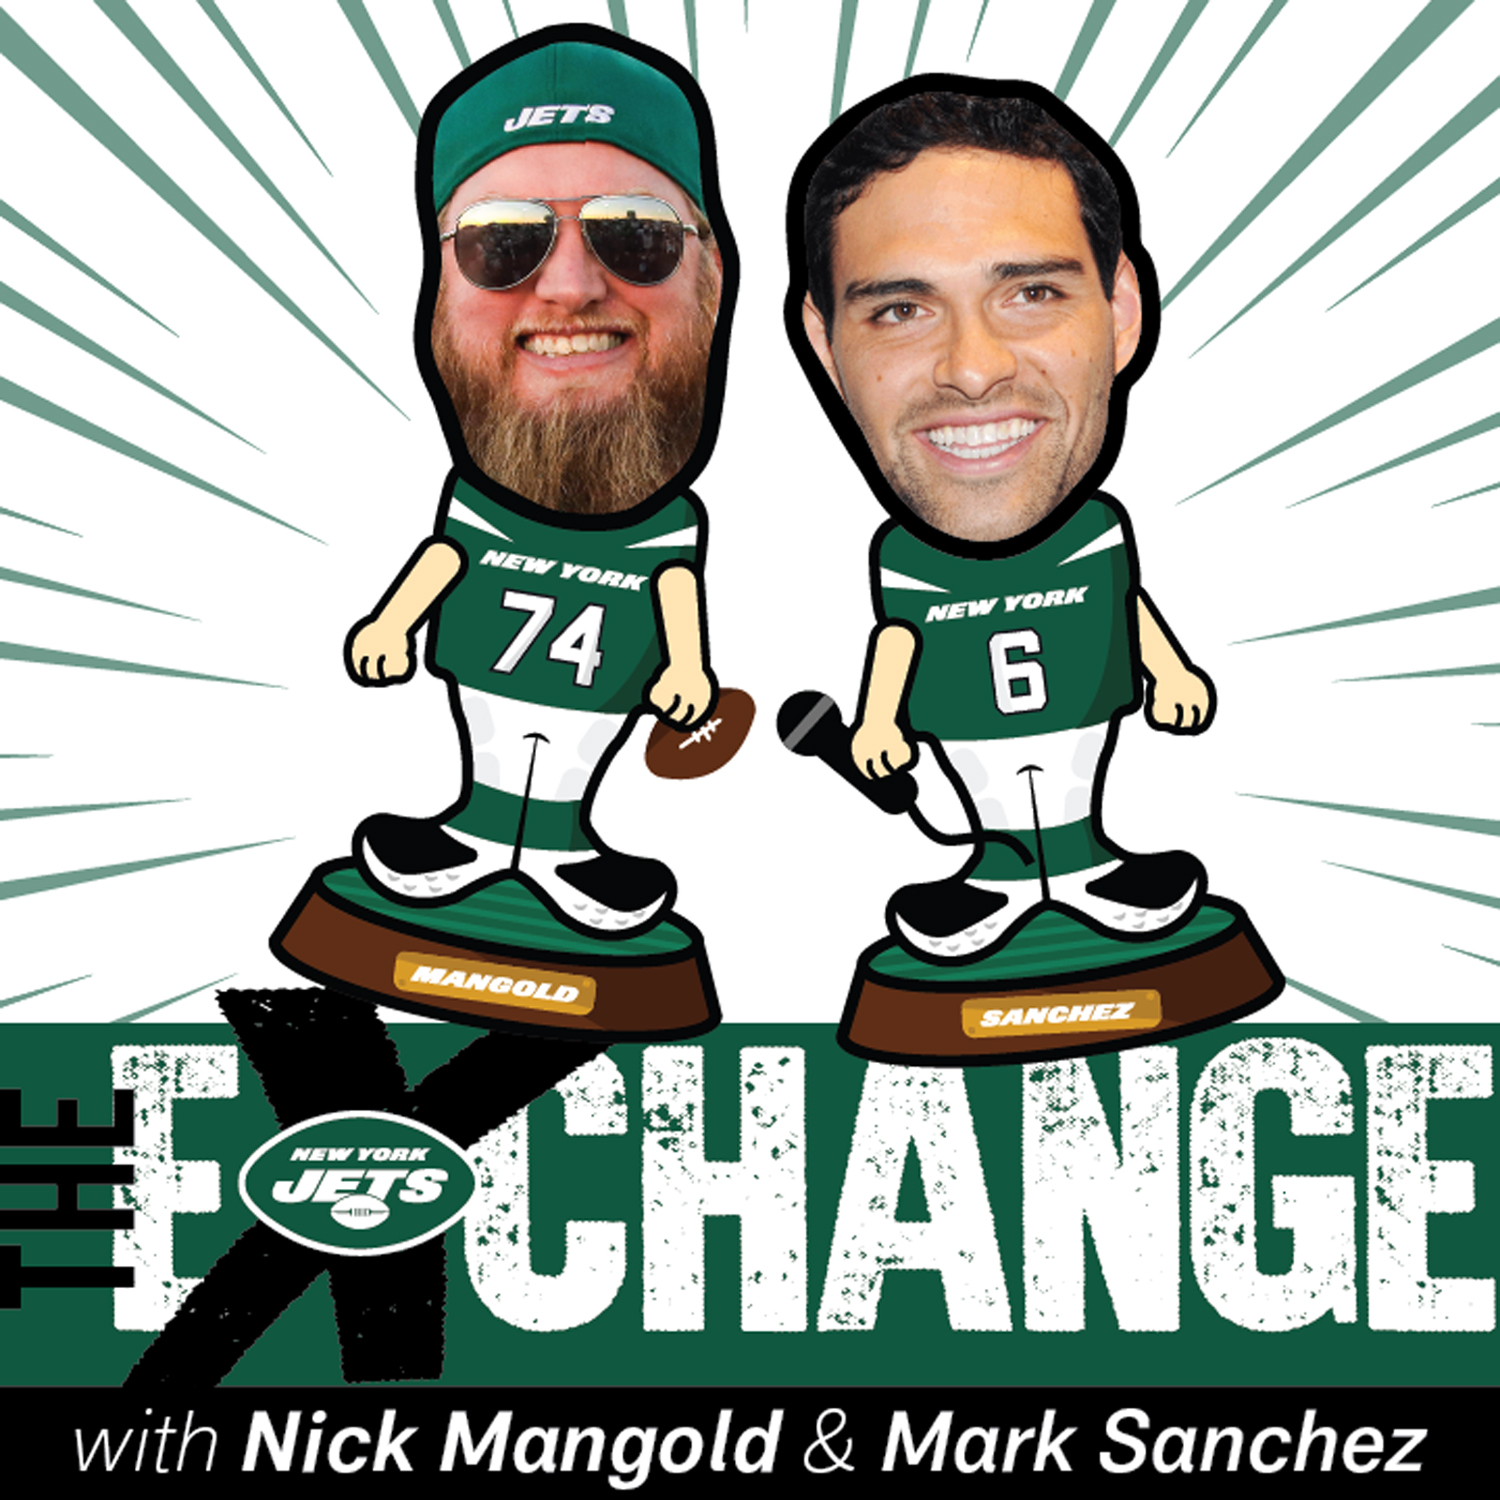 The Exchange Podcast with Nick Mangold & Mark Sanchez | Rachael Ray & John Cusimano (S1EP4)